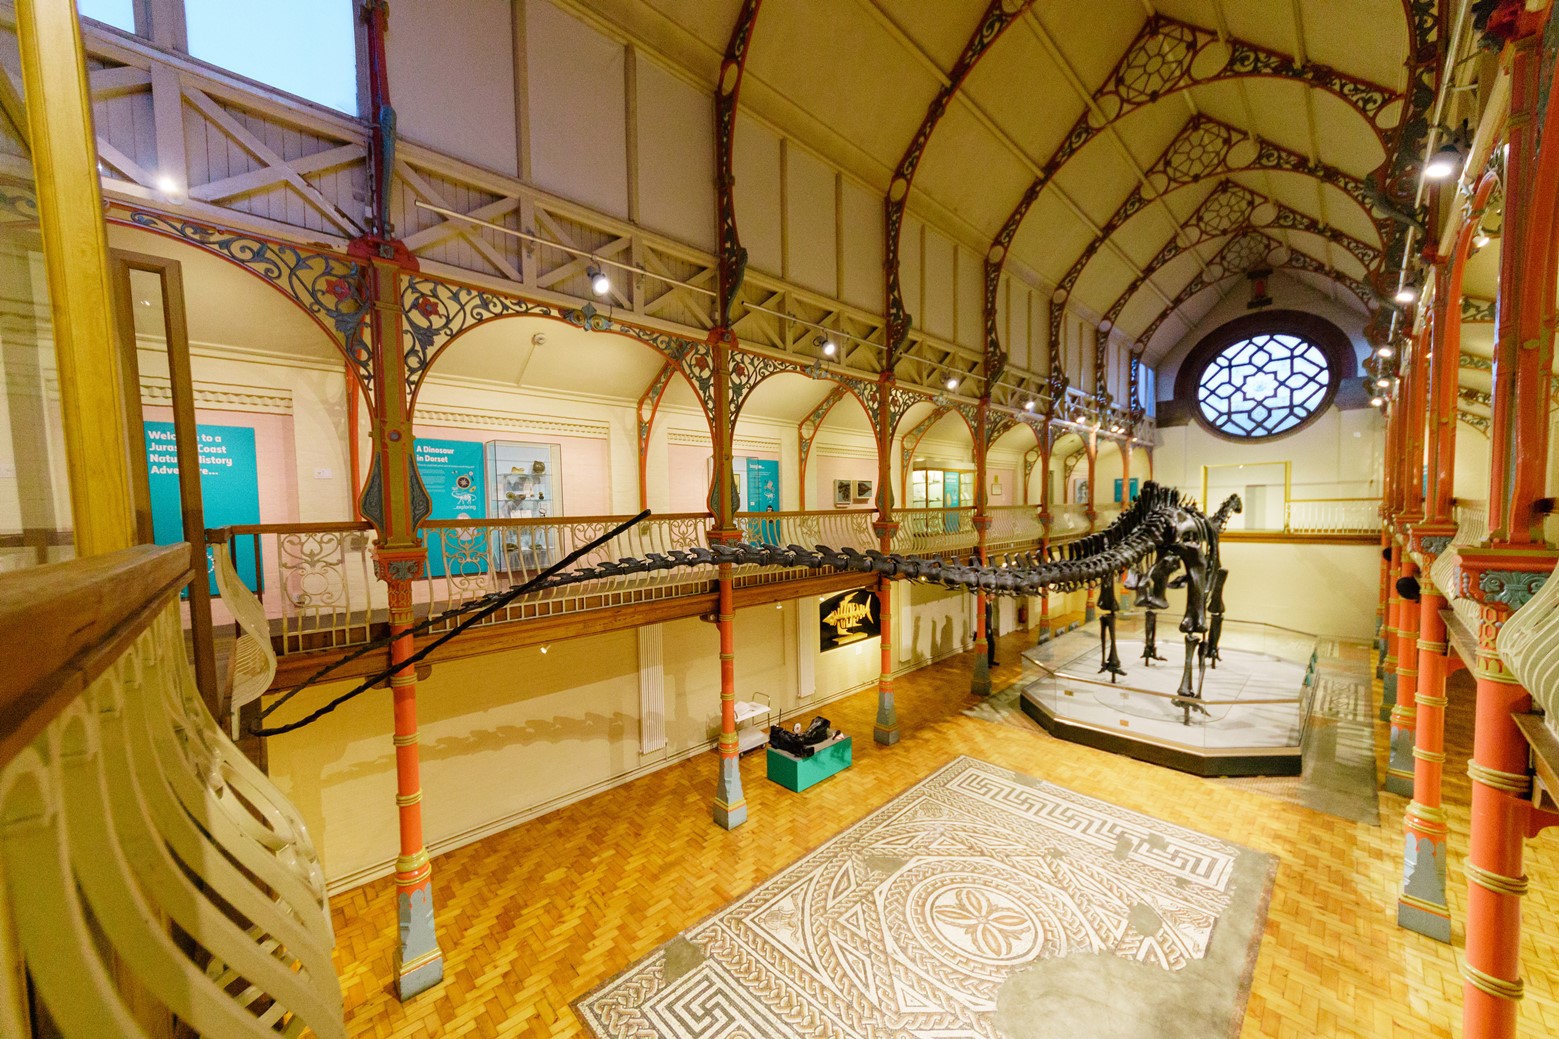 Dippy at Dorset County Museum © Trustees of the Natural History Museum, London [2018]. All rights reserved